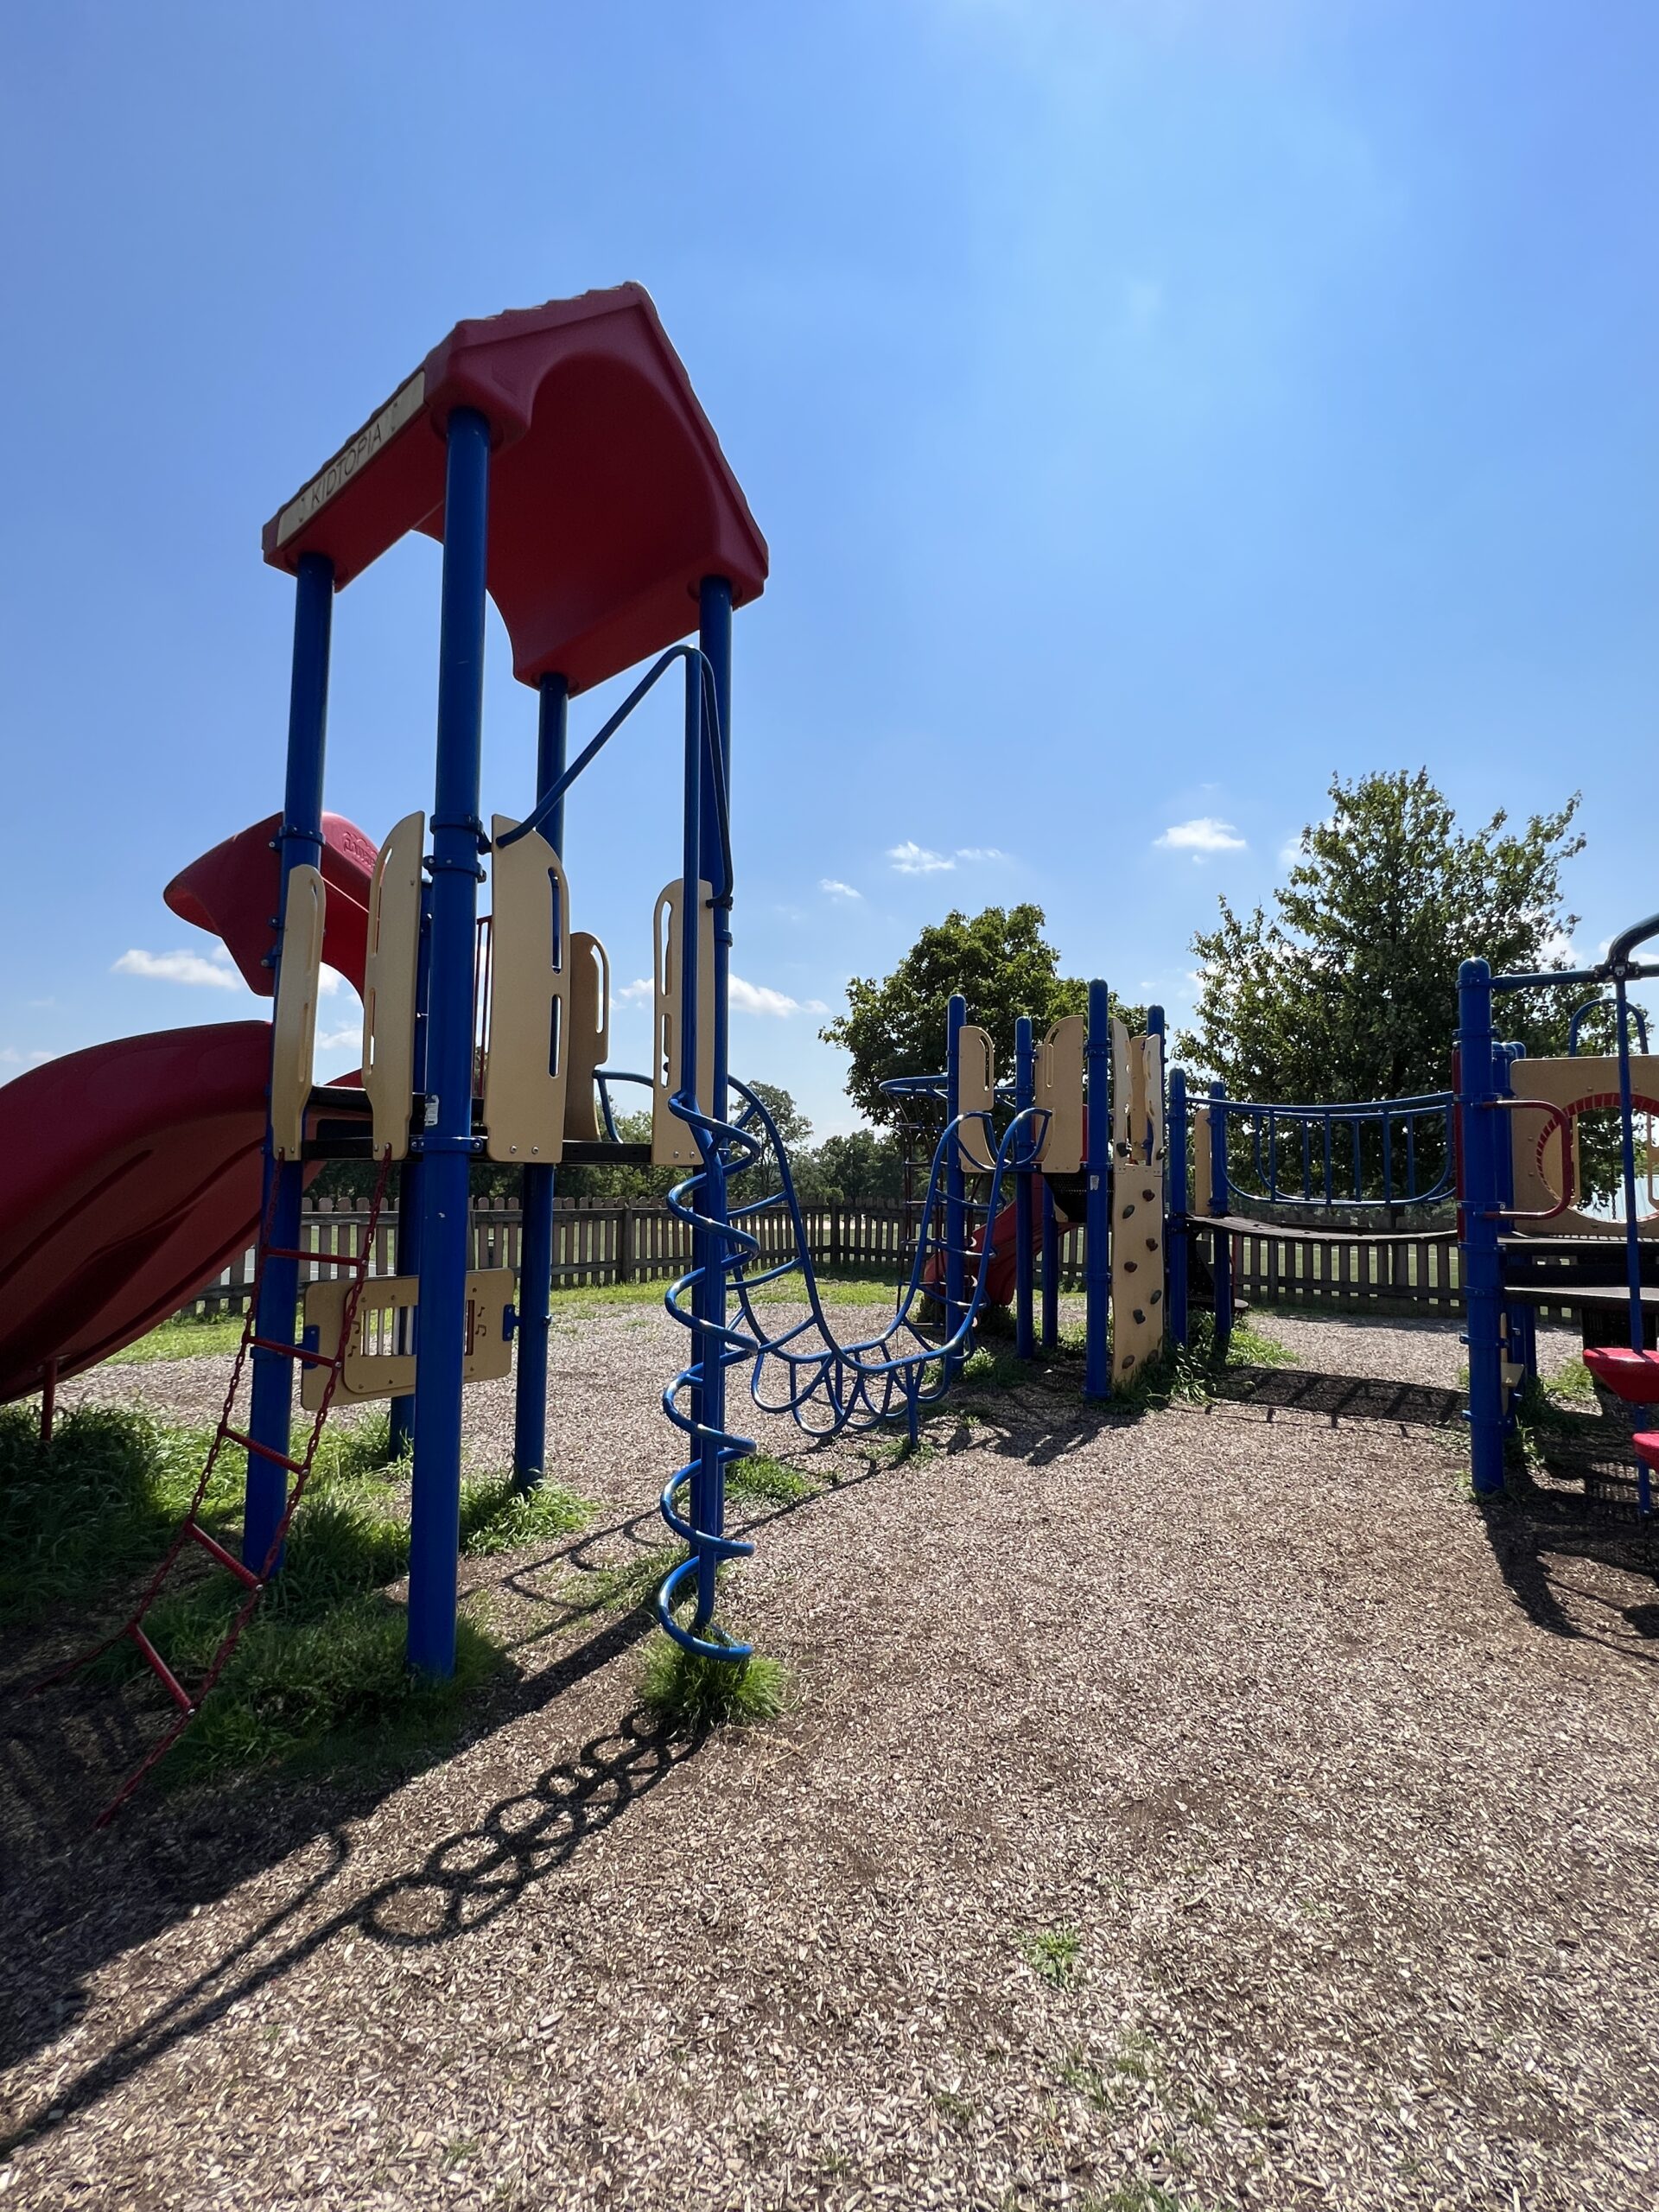 Alexandria Township Park Playground in Milford NJ - Features - climbing features on back of large playground